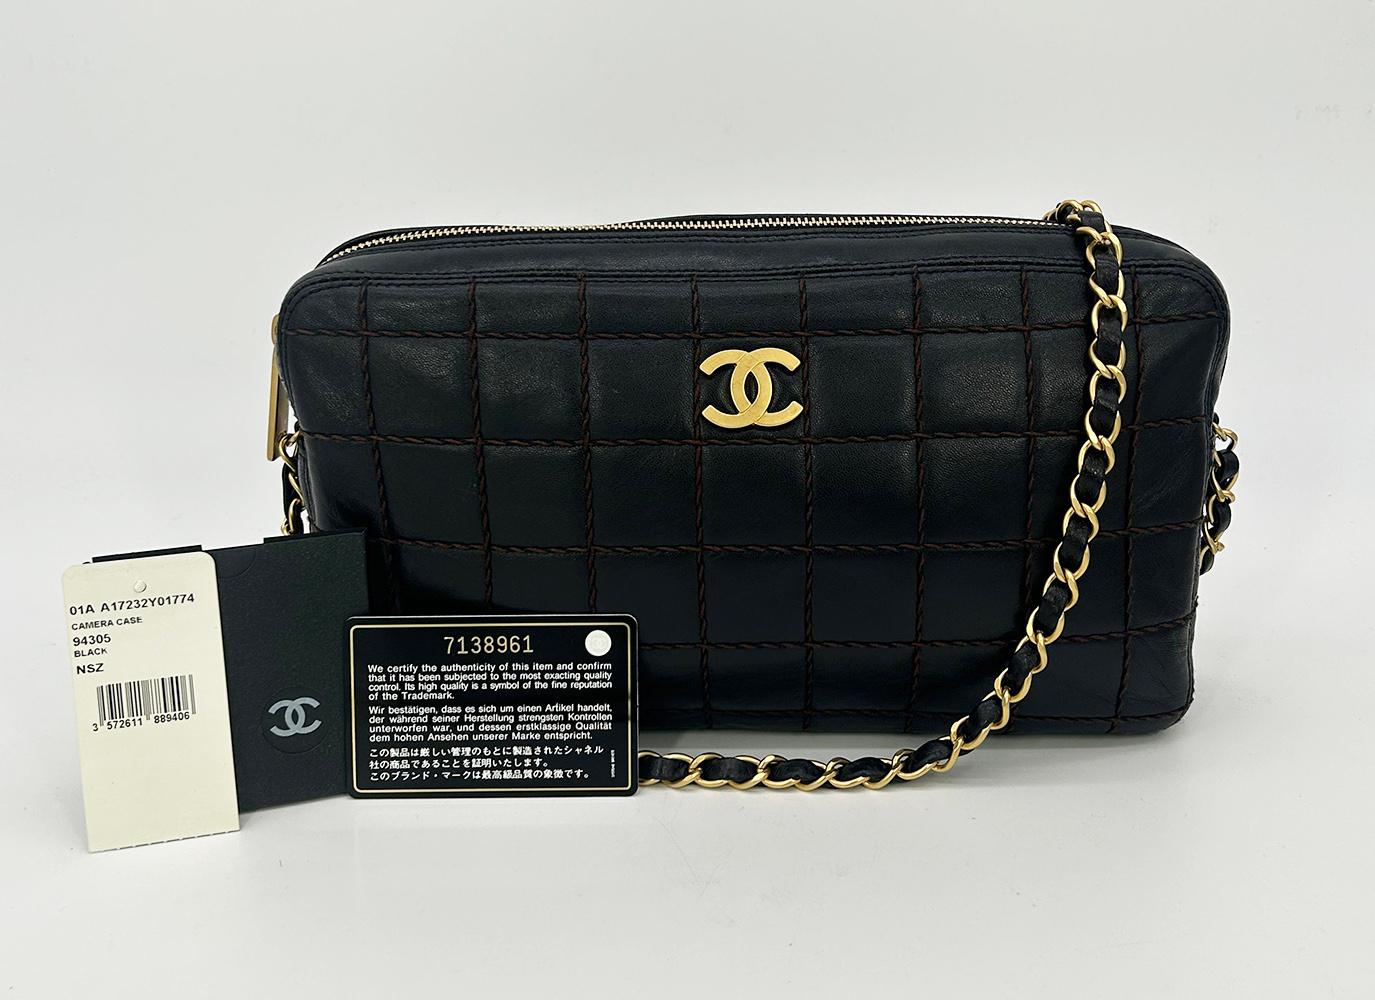 Chanel Black Square Quilted East West Chocolate Bar Bag 8